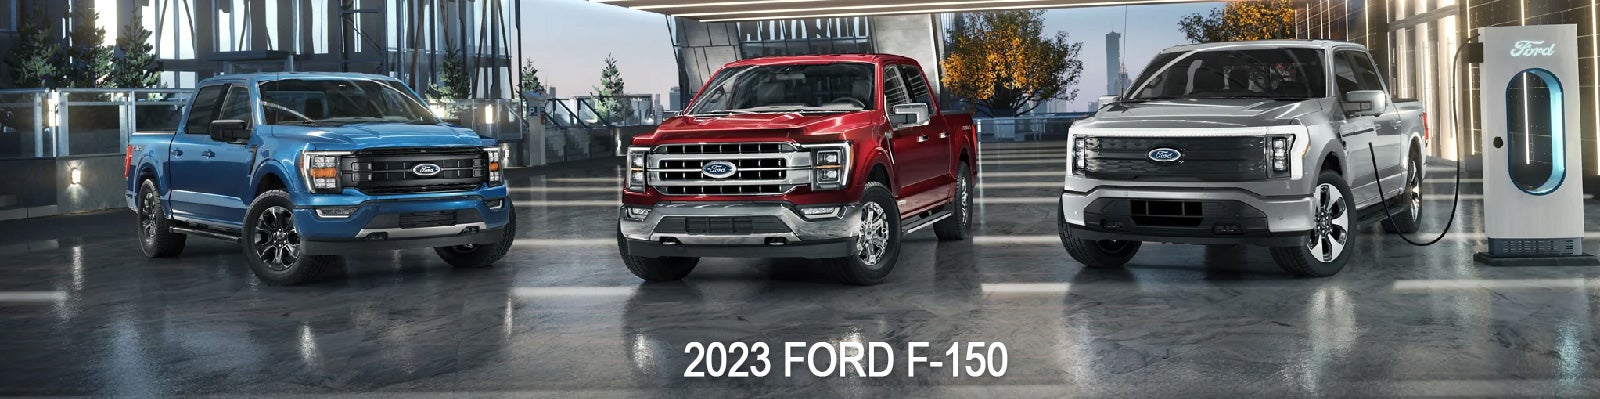 2023 Ford F-150 in Muscatine near Beettendorf, IA